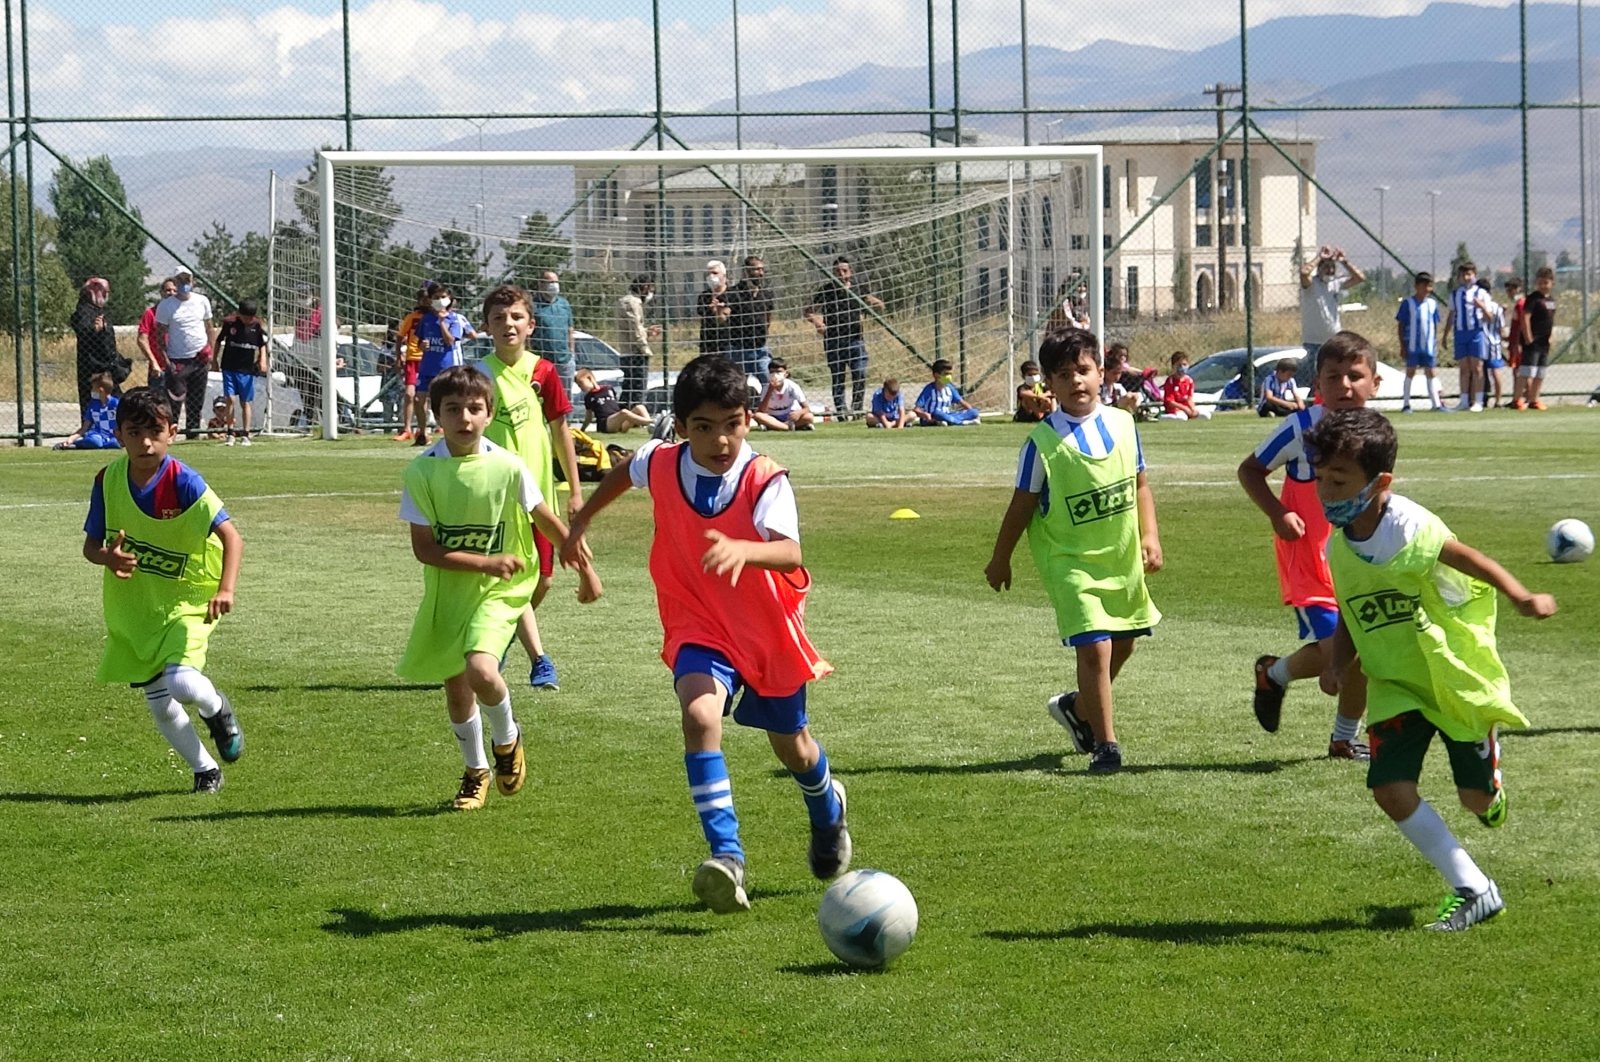 Boys attend a football tryout for a local team, in Erzurum, eastern Turkey, Aug. 15, 2020. (DHA Photo)